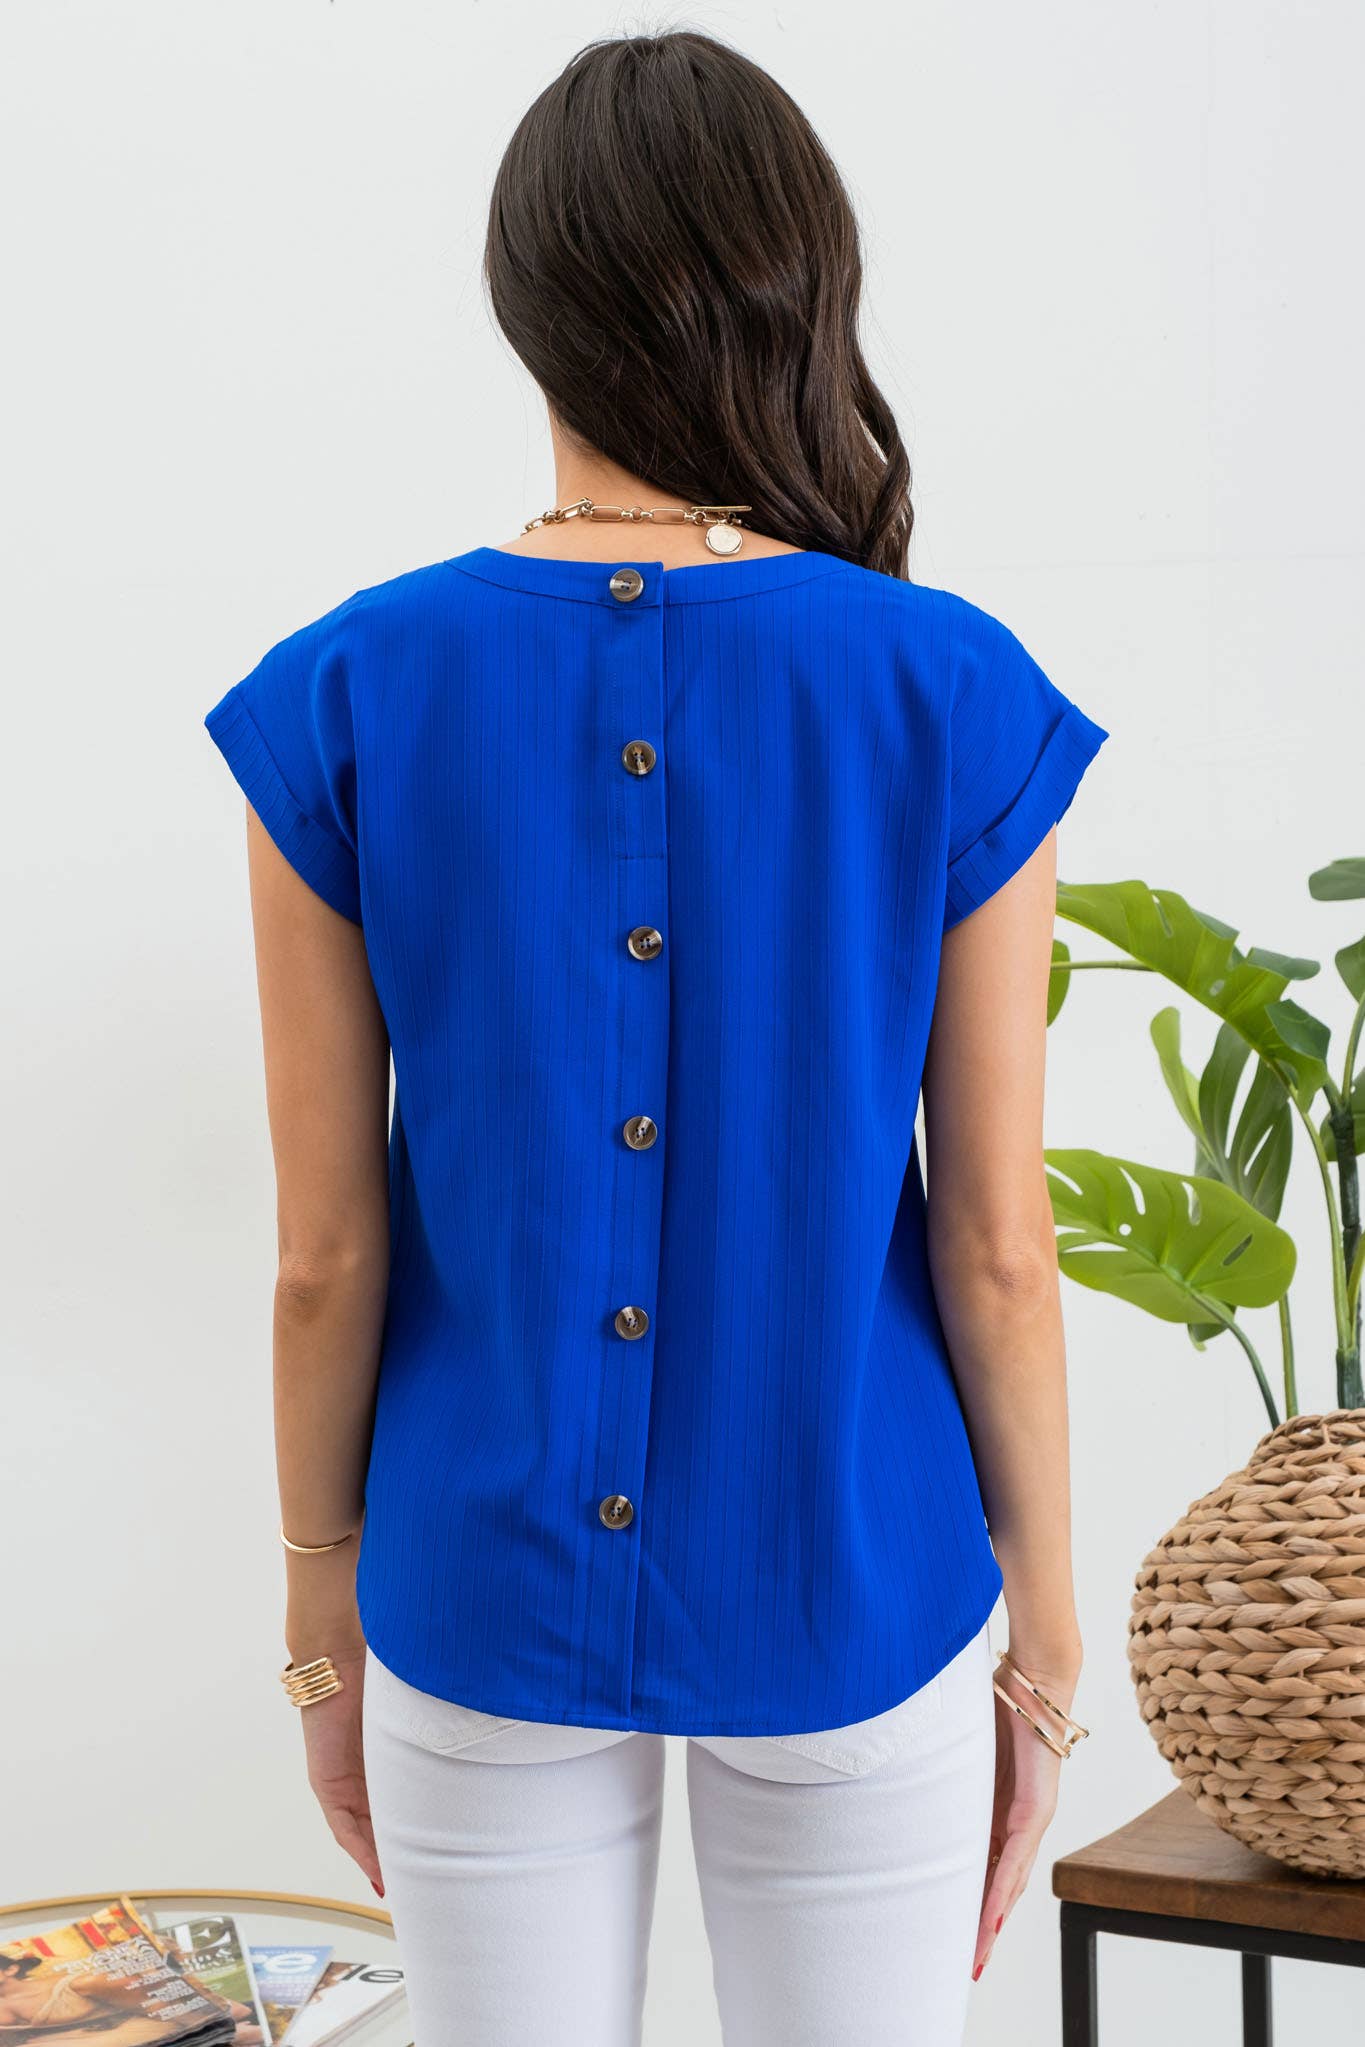 Floral Eyelet Detail Woven Top Plus - White and Royal Blue